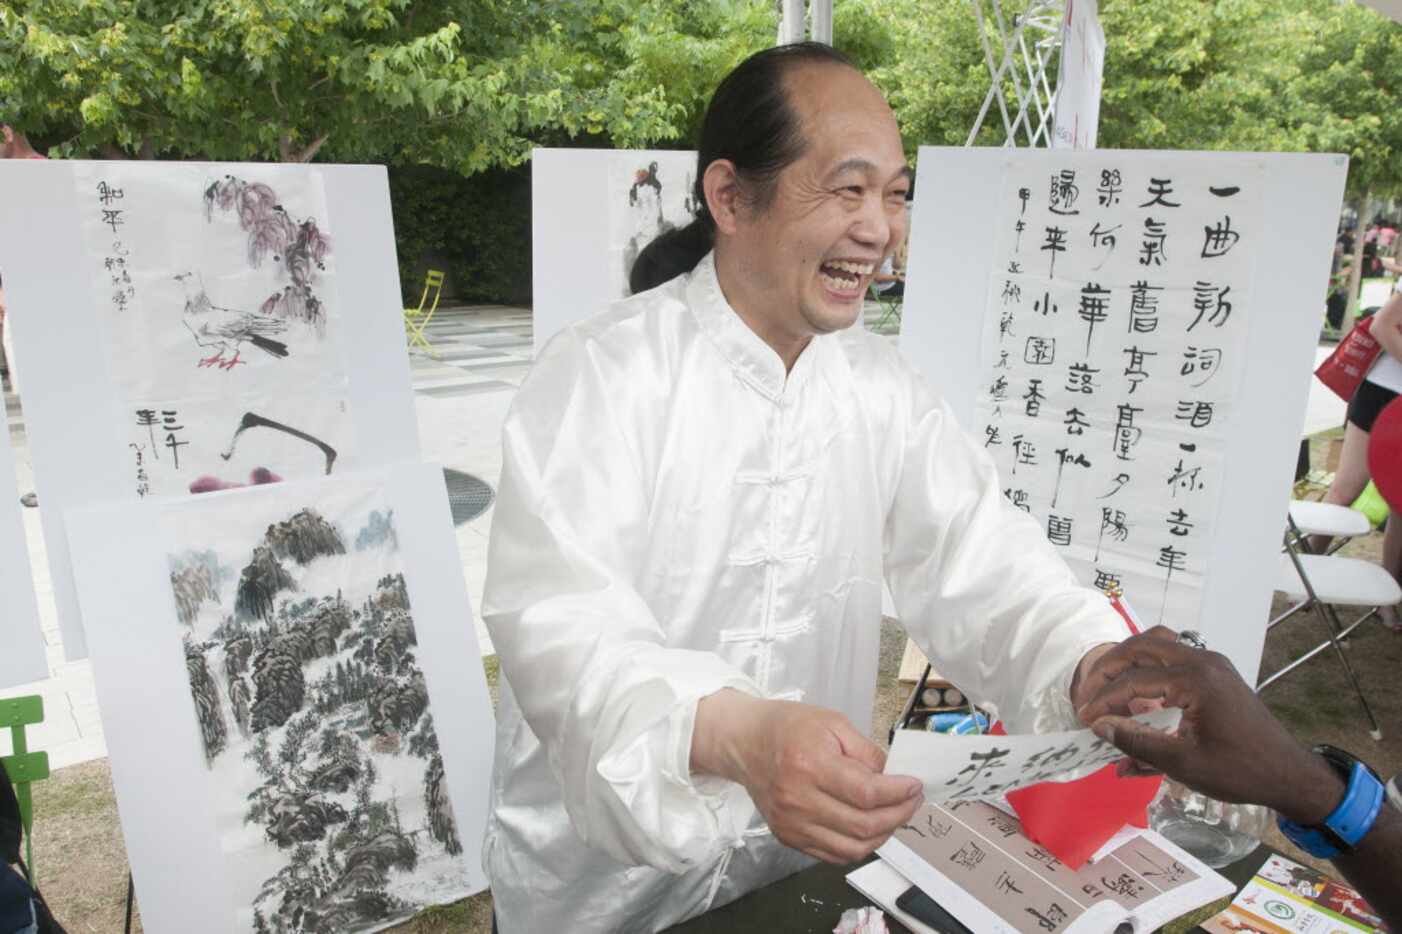 Dr. Zhang Qianyuan, Chinese director of the Confucius Institute at UT Dallas wrote visitors...